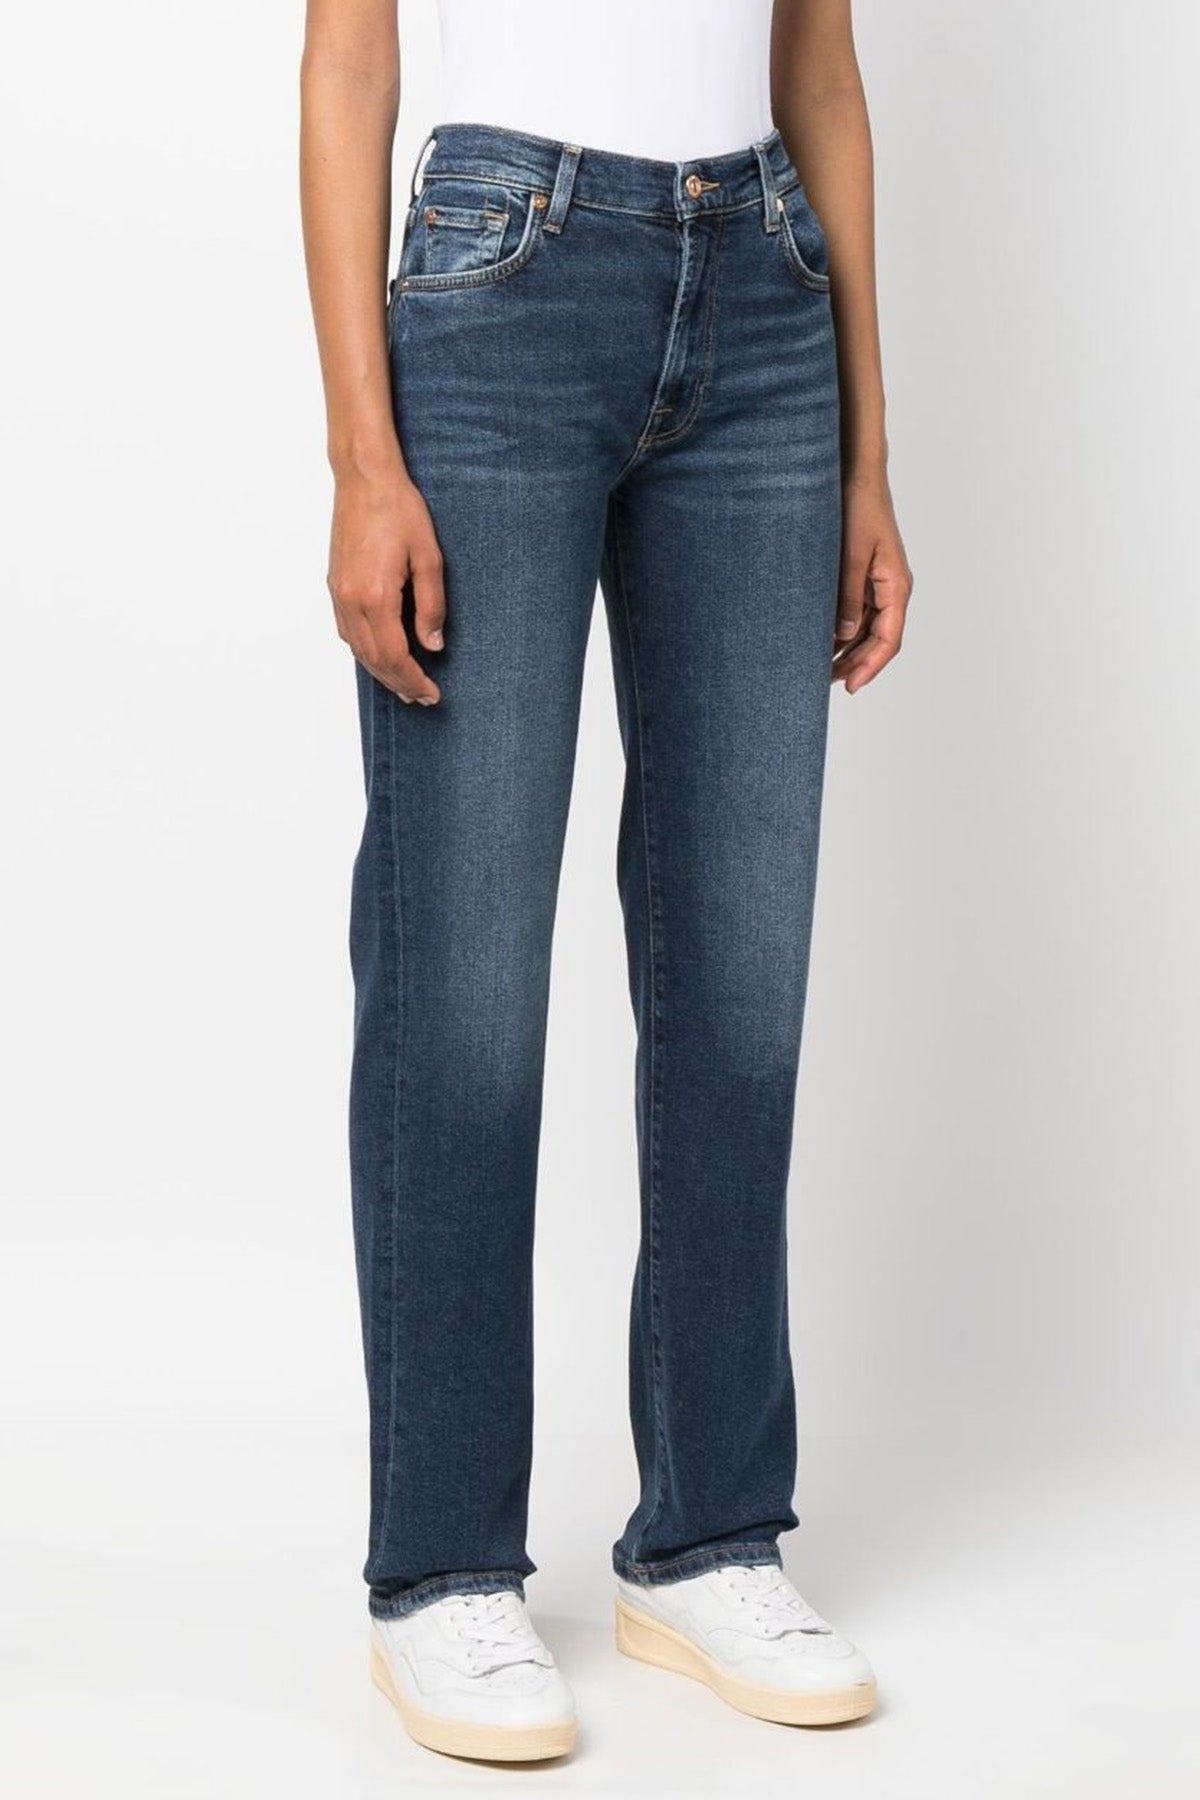 7 For All Mankind Ellie Luxe Vintage Straight Fit Jeans-Libas Trendy Fashion Store